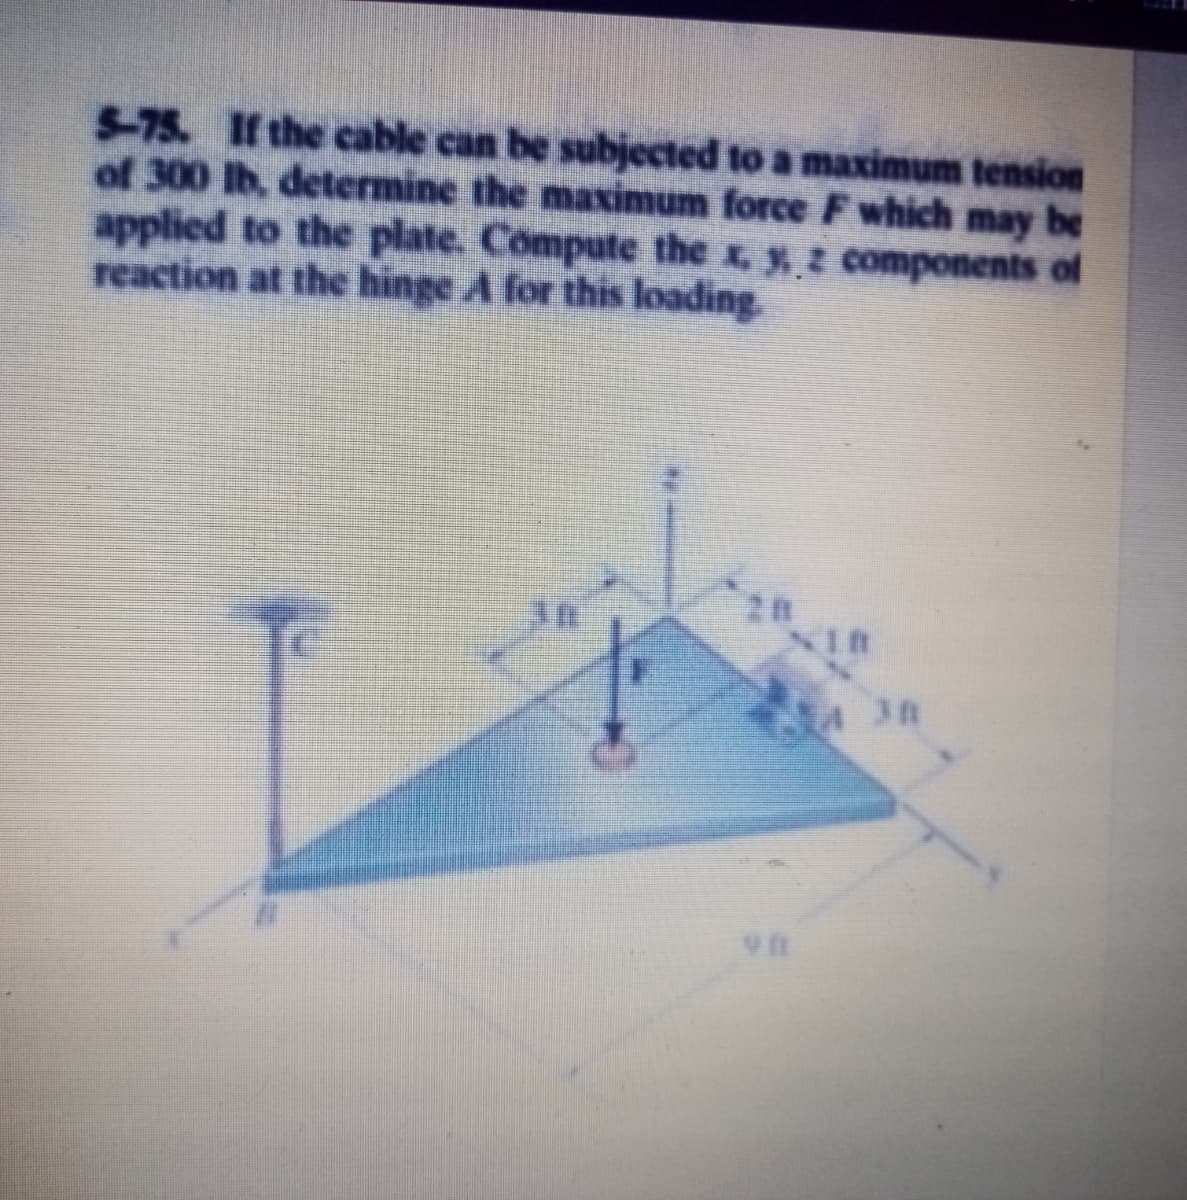 5-75. If the cable can be subjected to a maximum tension
of 300 lb, determine the maximum force F which may be
applied to the plate. Compute the x, yz components of
reaction at the hinge A for this loading.
NIB
